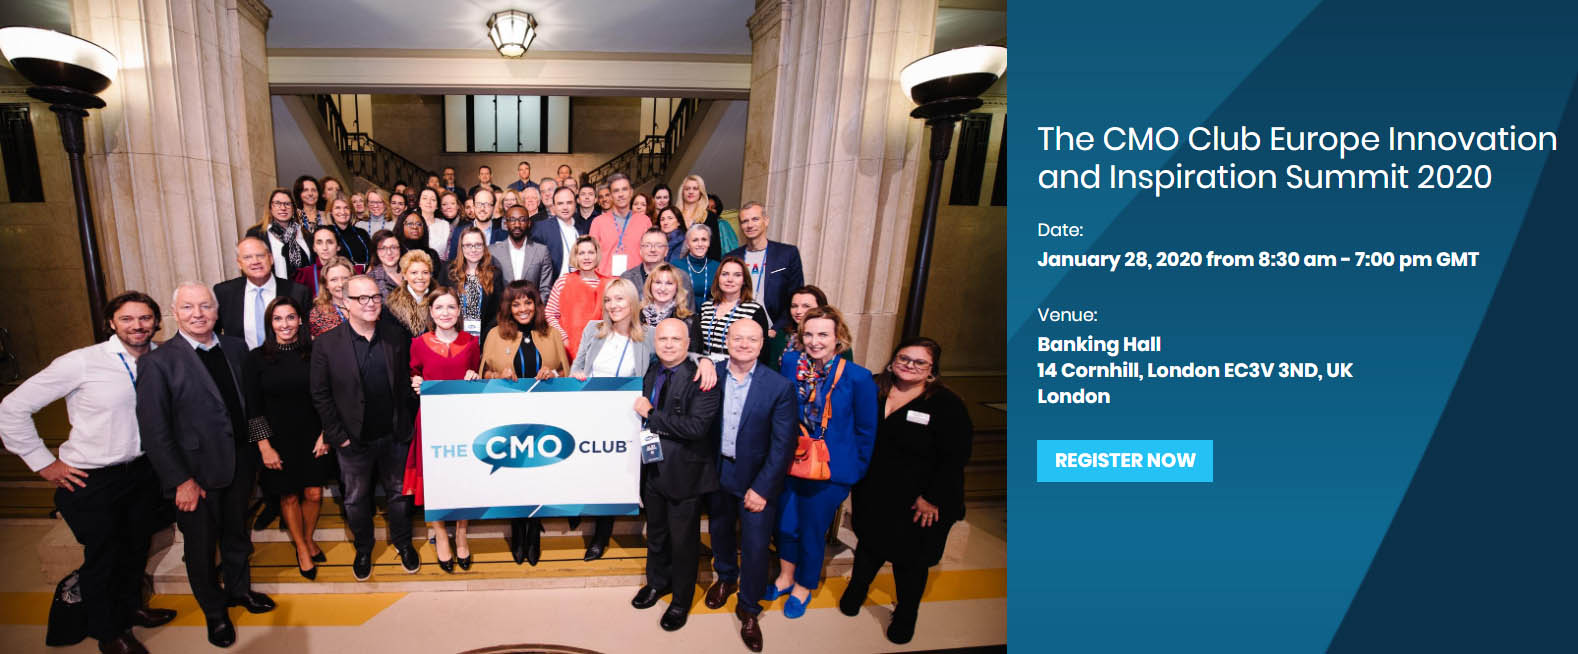 Headhunters for marketing executives' top CMO events in 2020